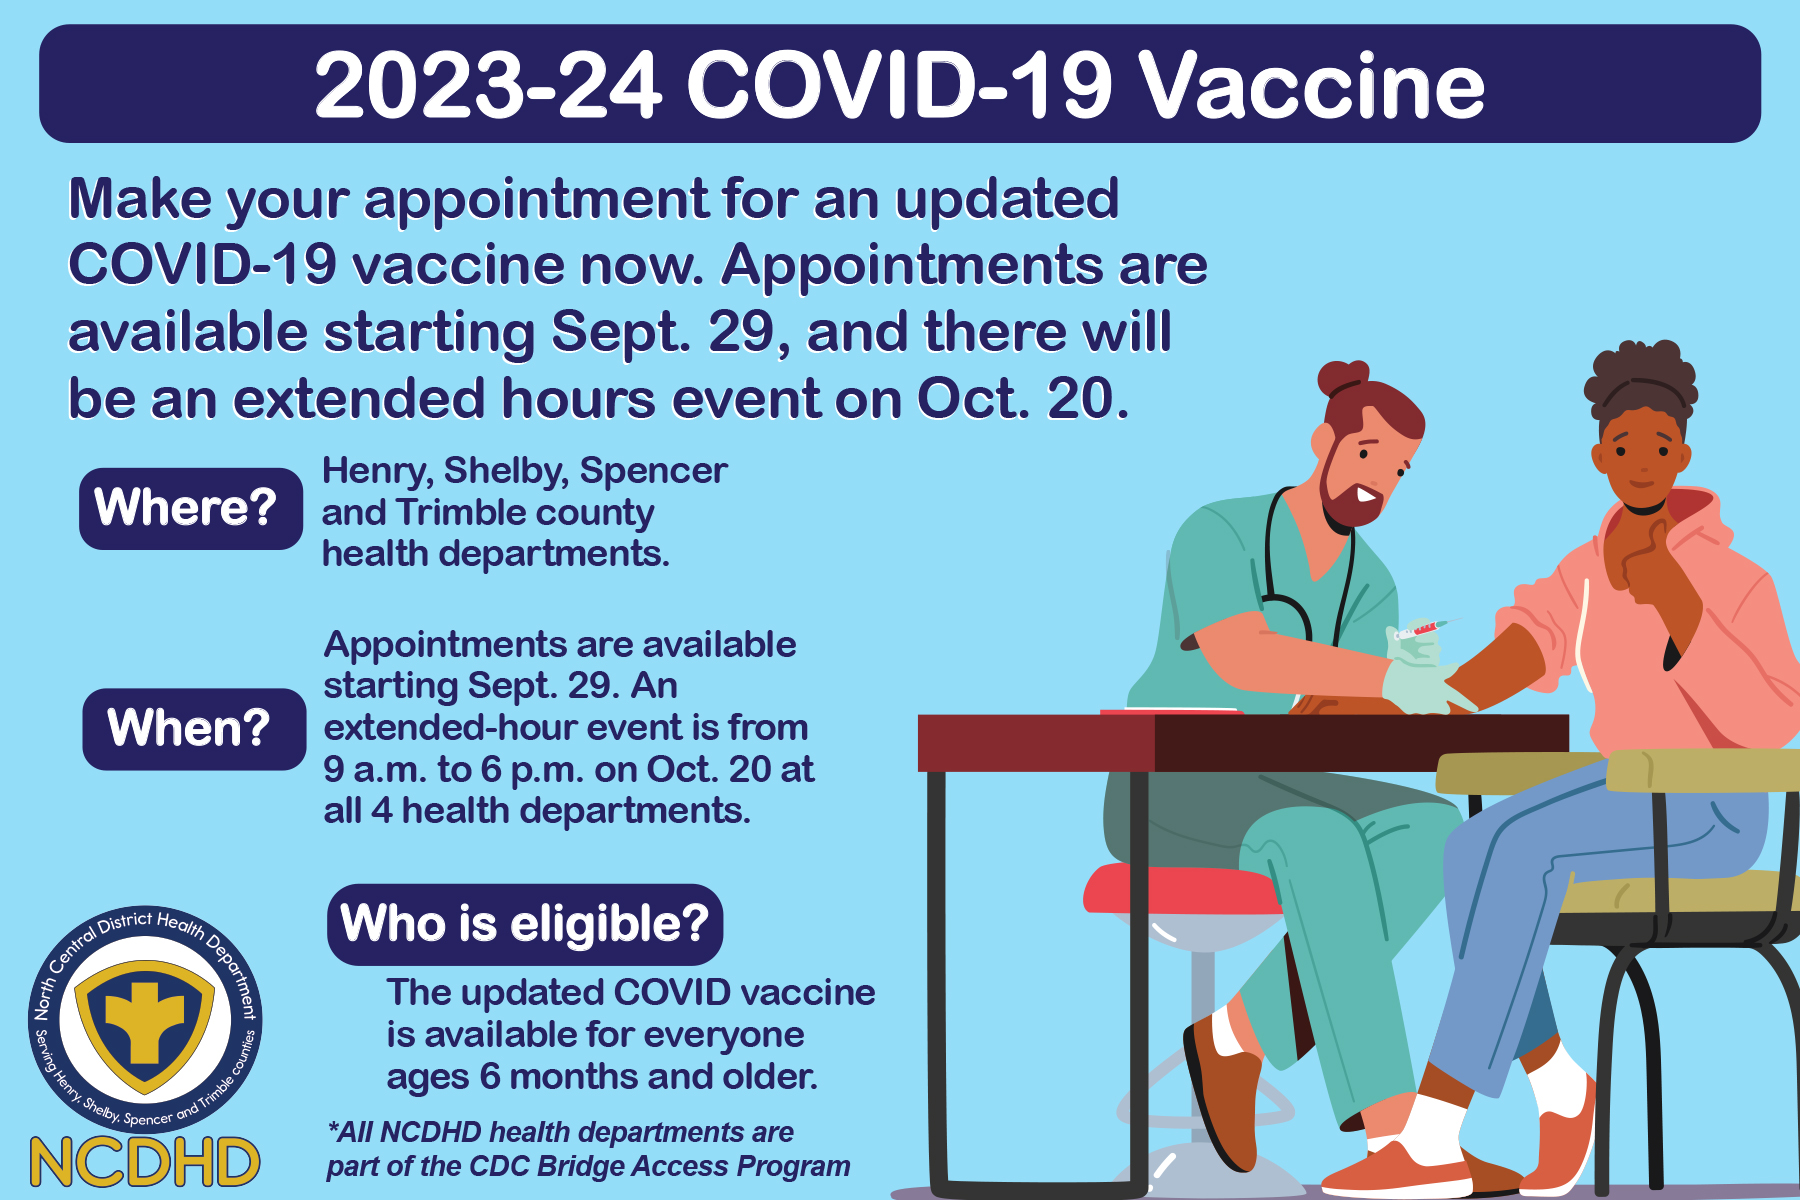 2023-24 COVID-19 Vaccine appoints are available at the North Central District Health Department. Make yours now!